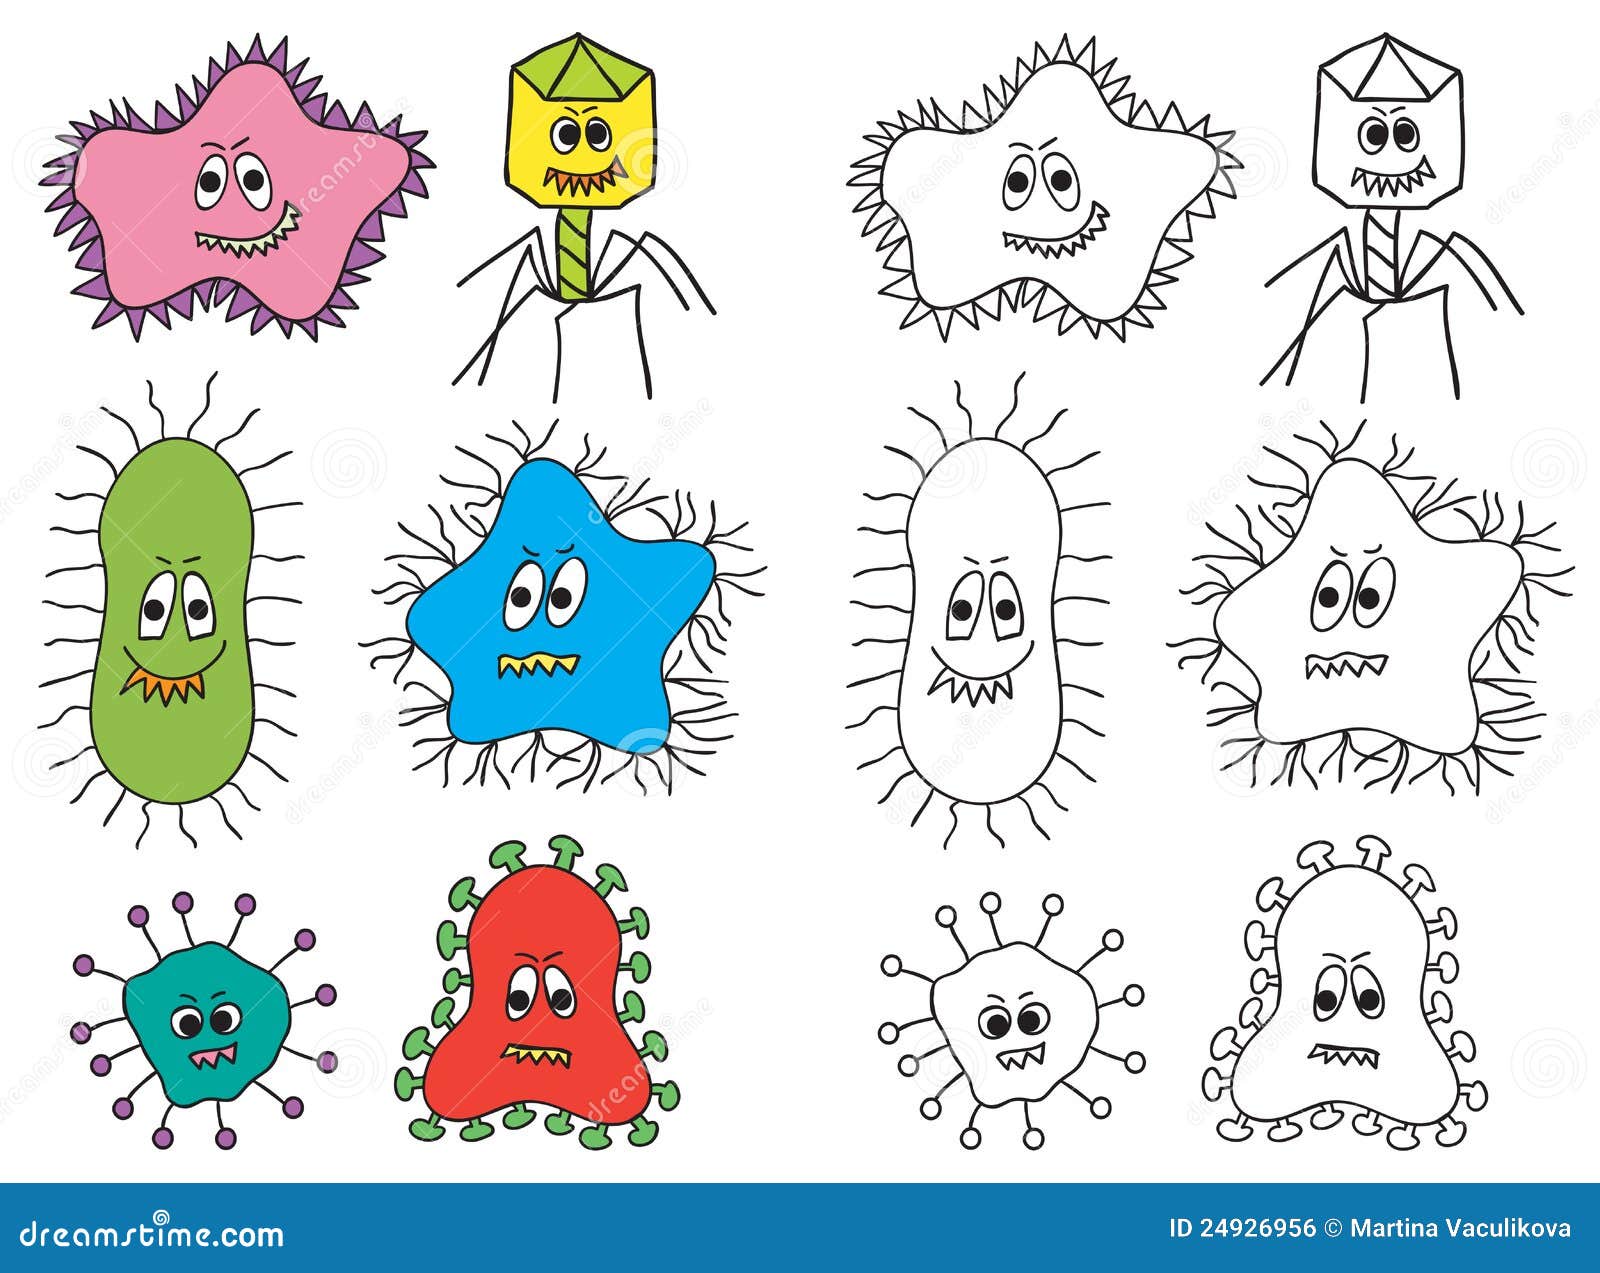 Illustration Of Bacteria And Virus Stock Vector - Illustration of